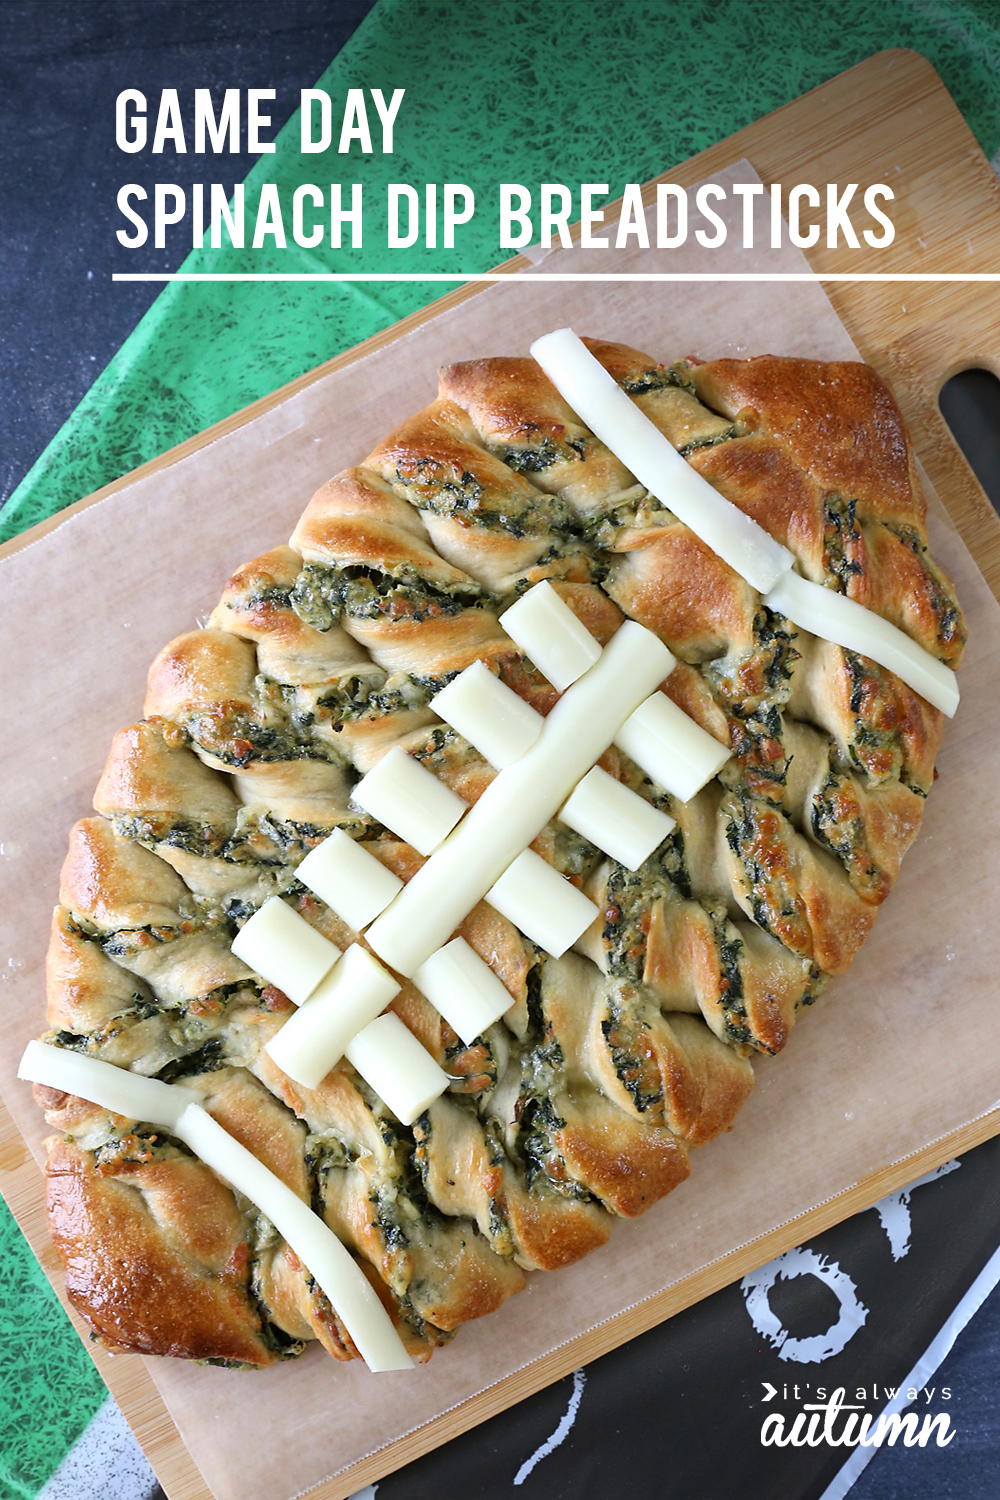 Spinach dip breadsticks in the shape of a football